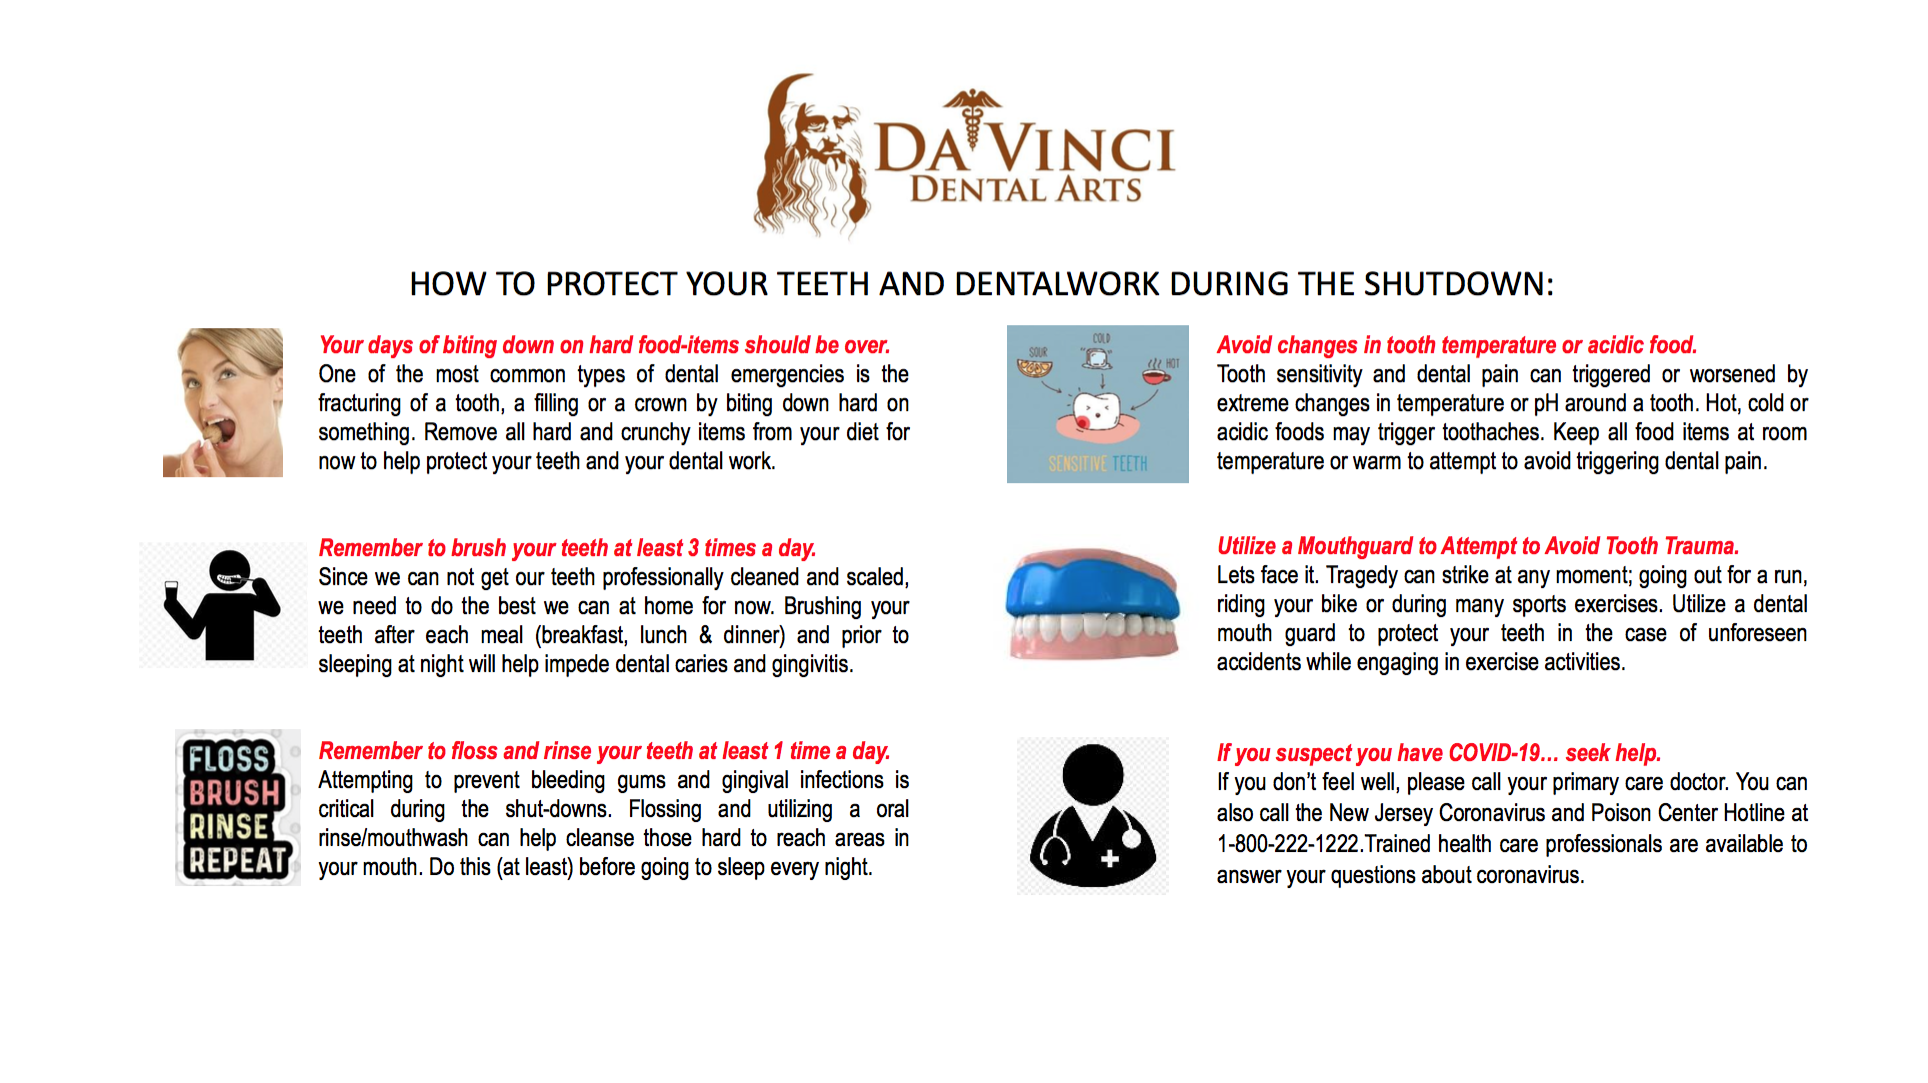 DOC 004- Protecting your teeth during the shutdown.png